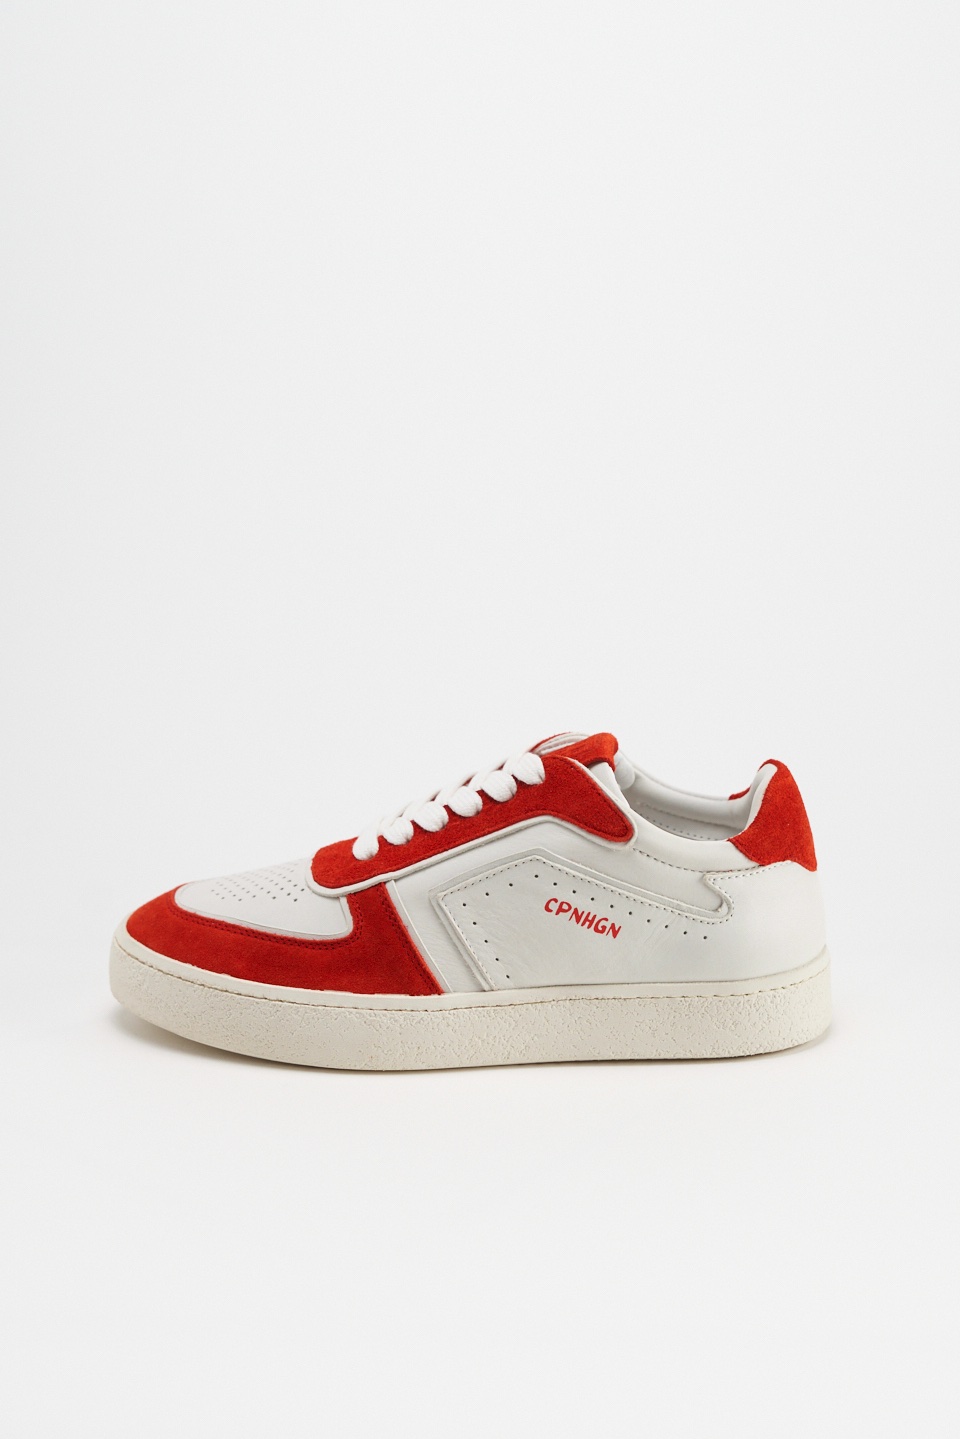 CPH264 leather mix white/red - alternative 3